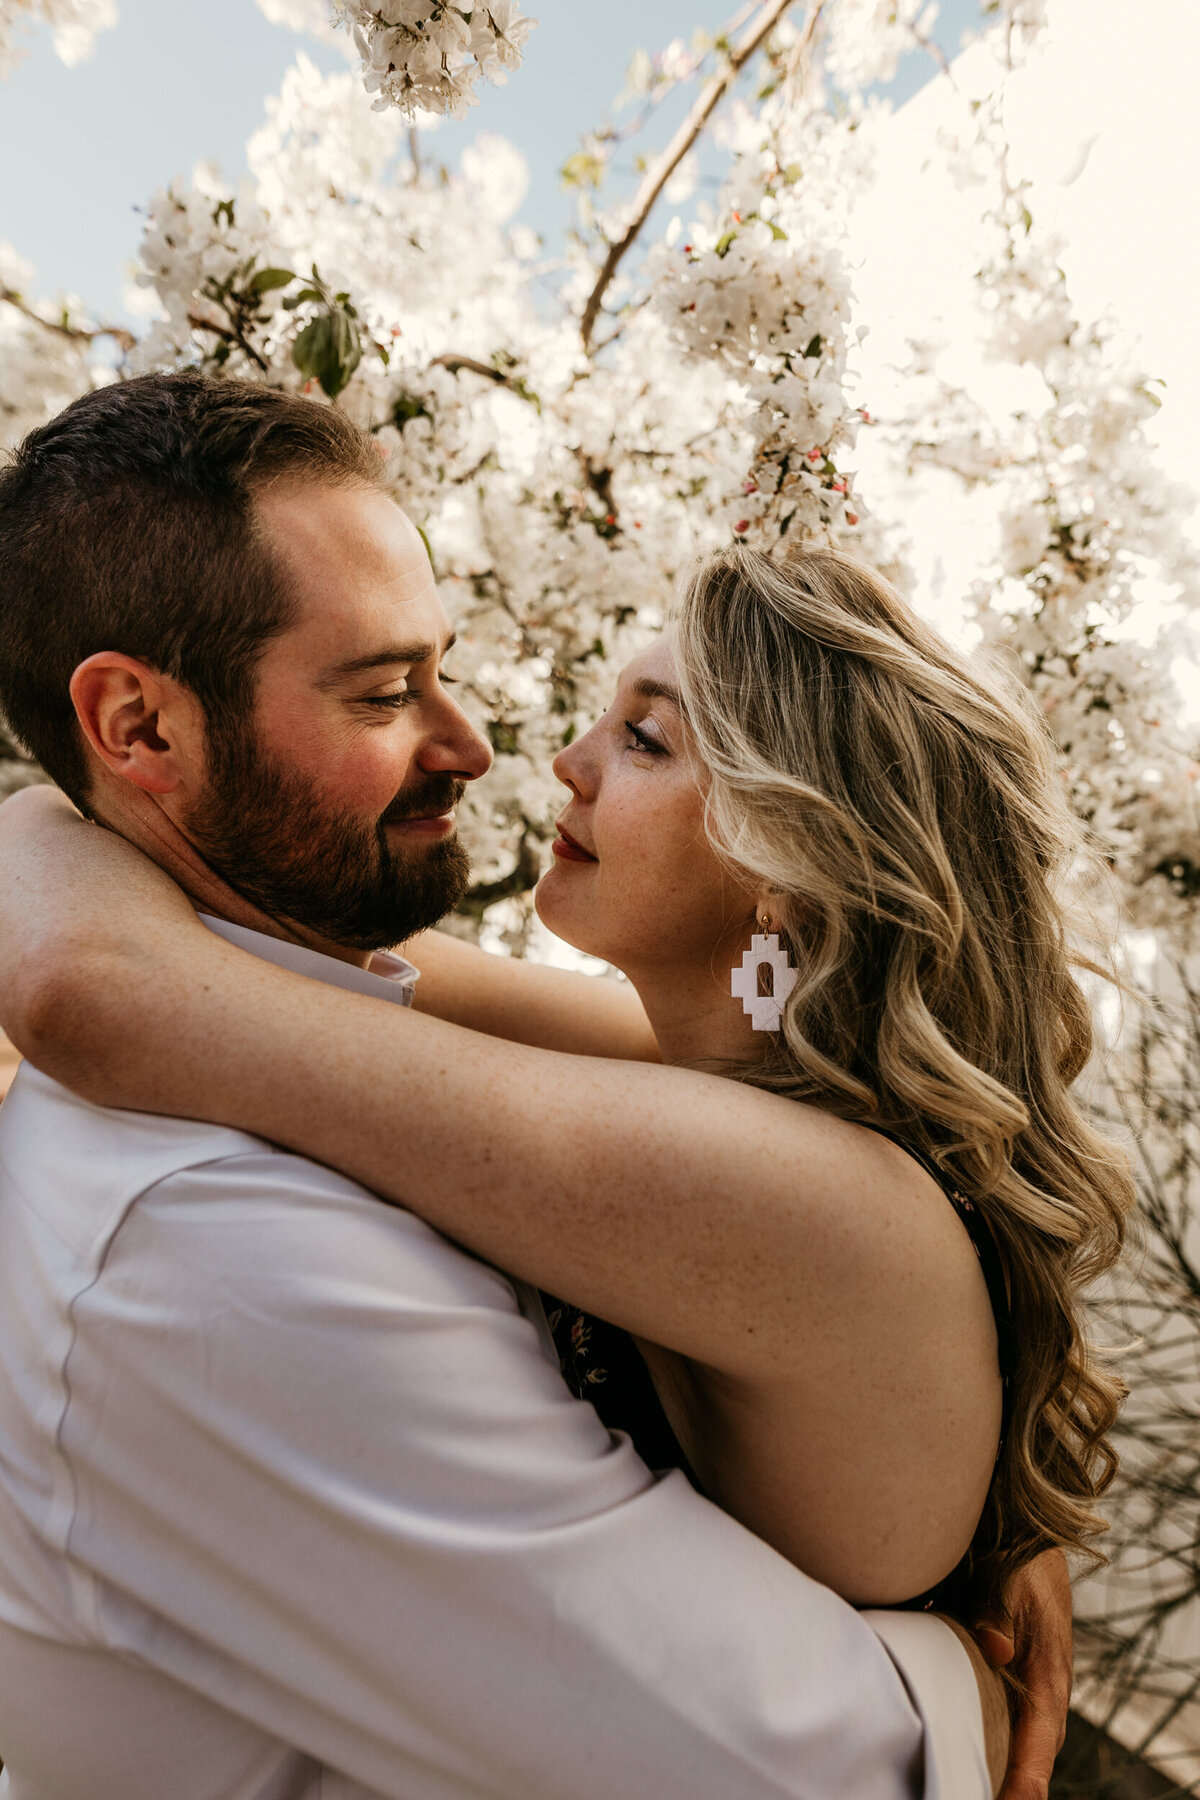 couple about to kiss in from of a tree with white blooms